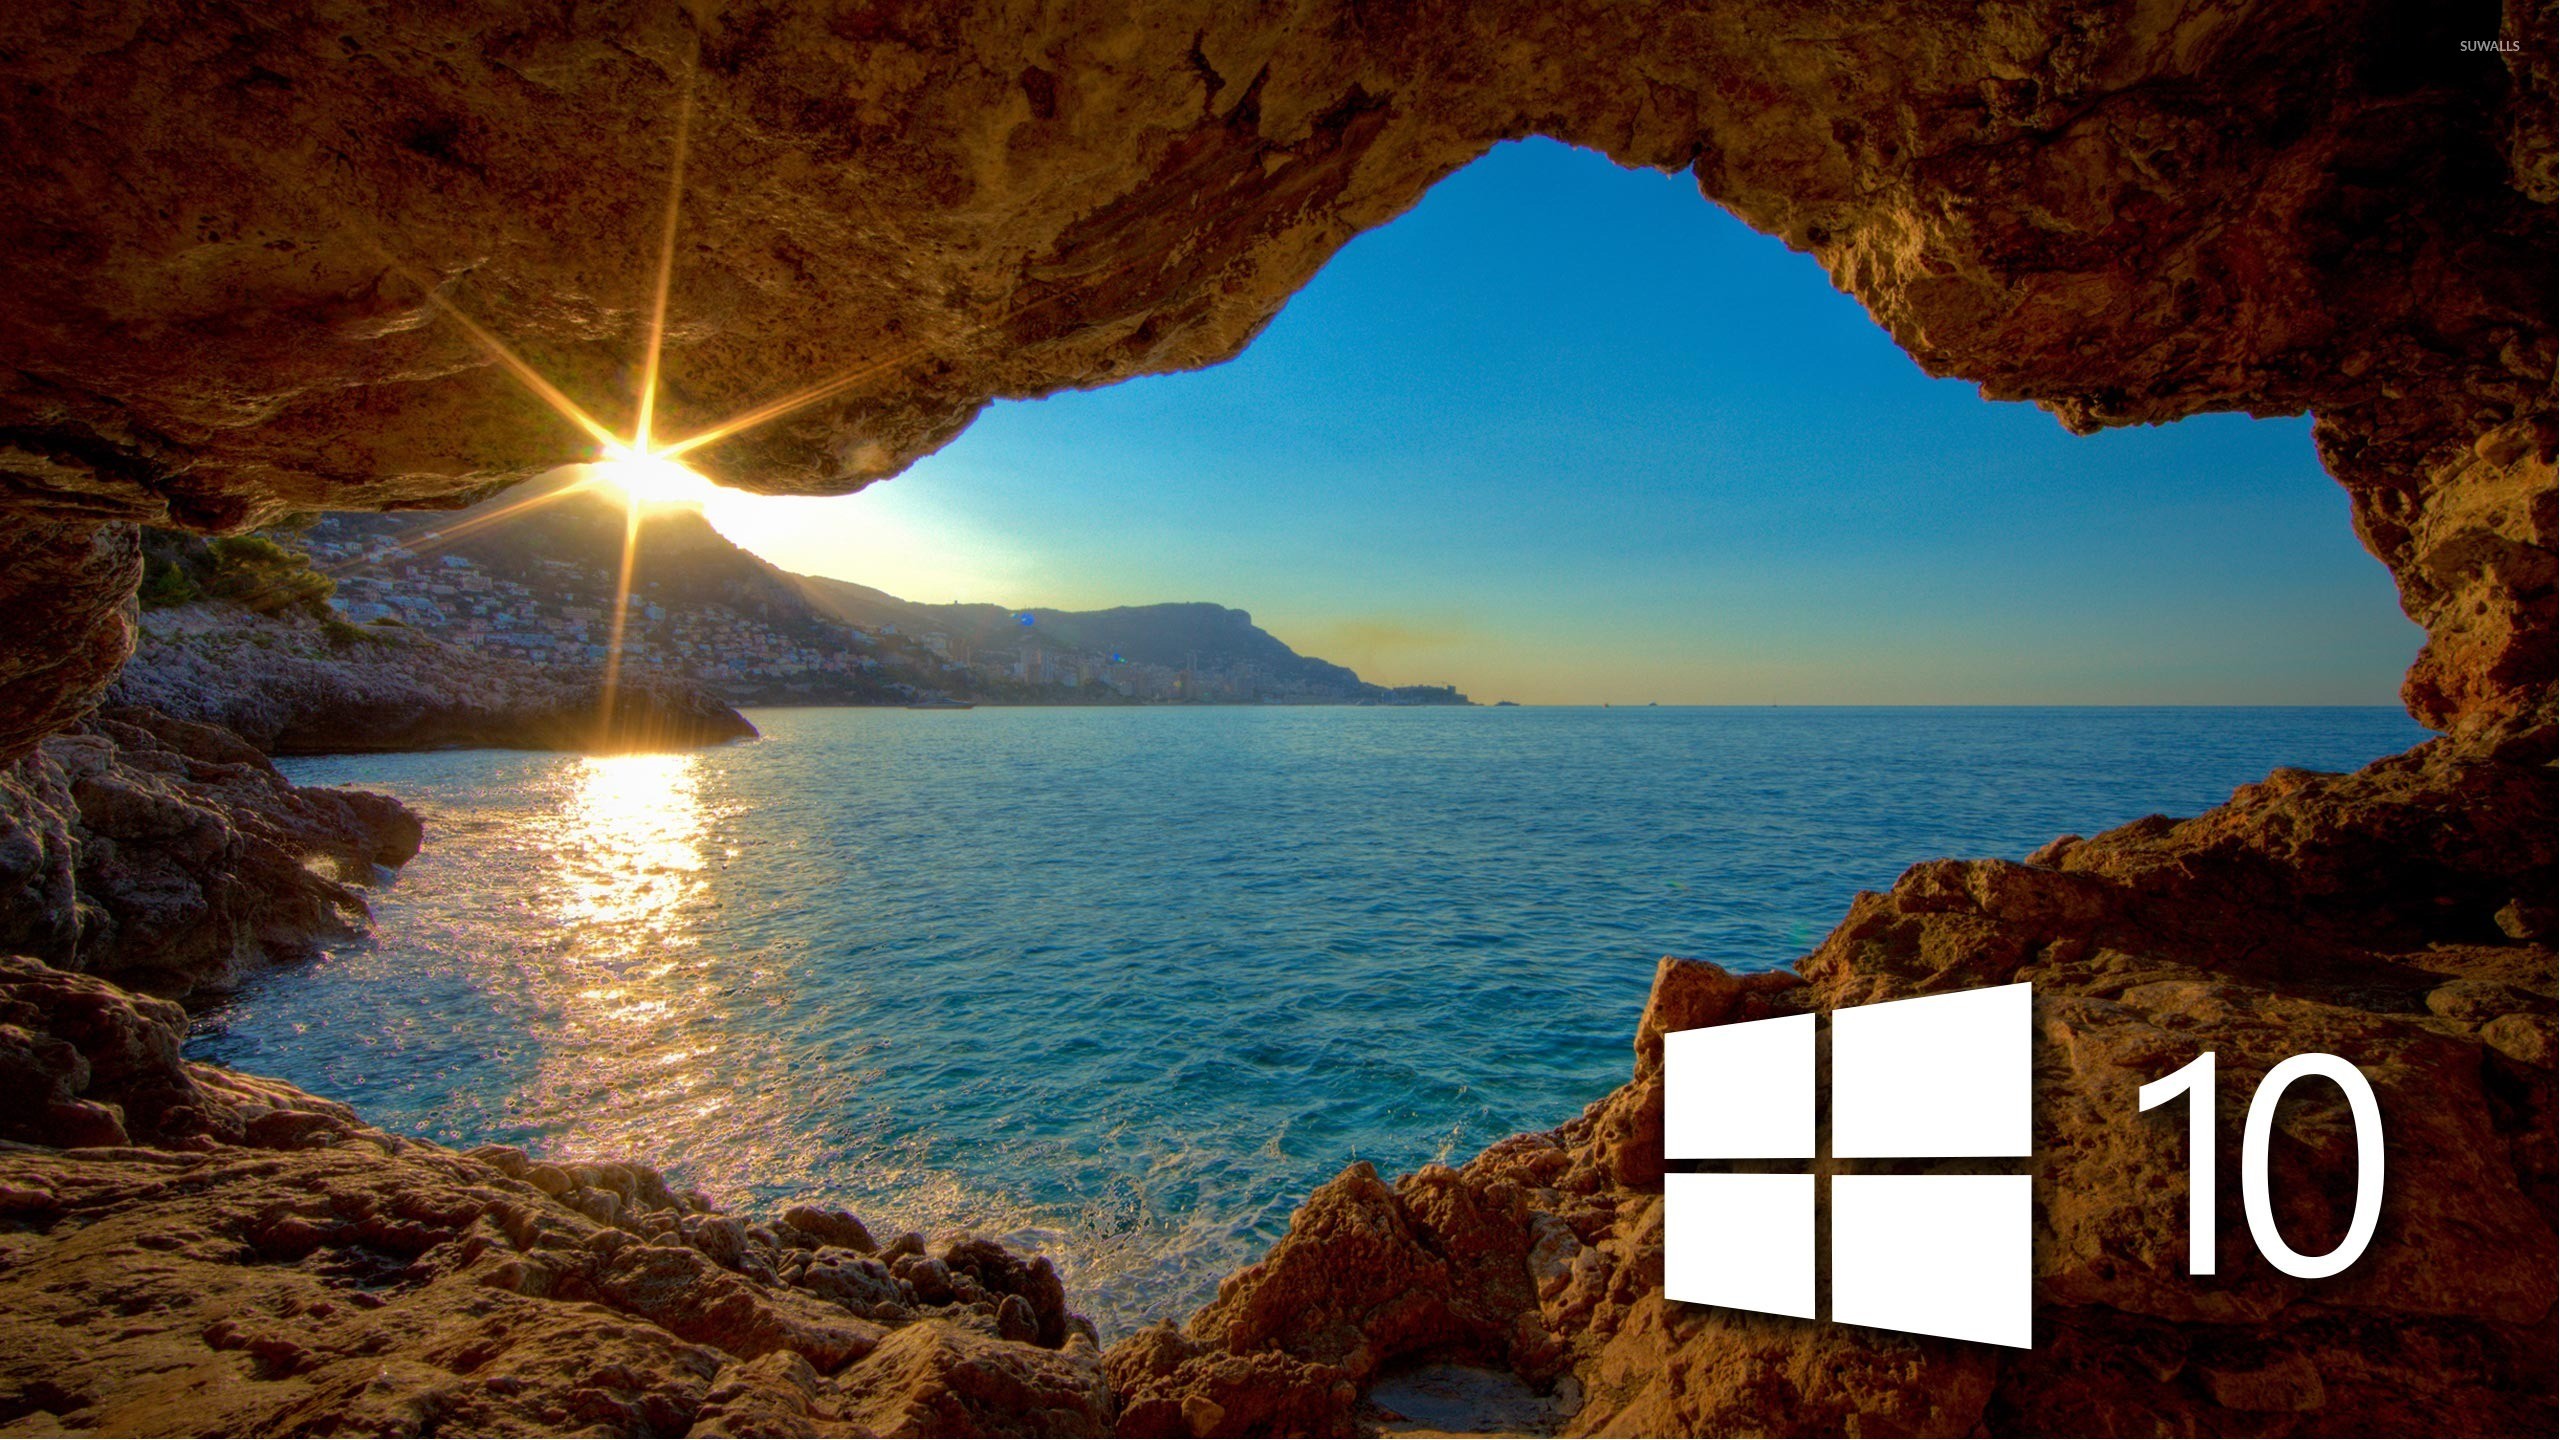 Windows 10 over the cave simple logo wallpaper